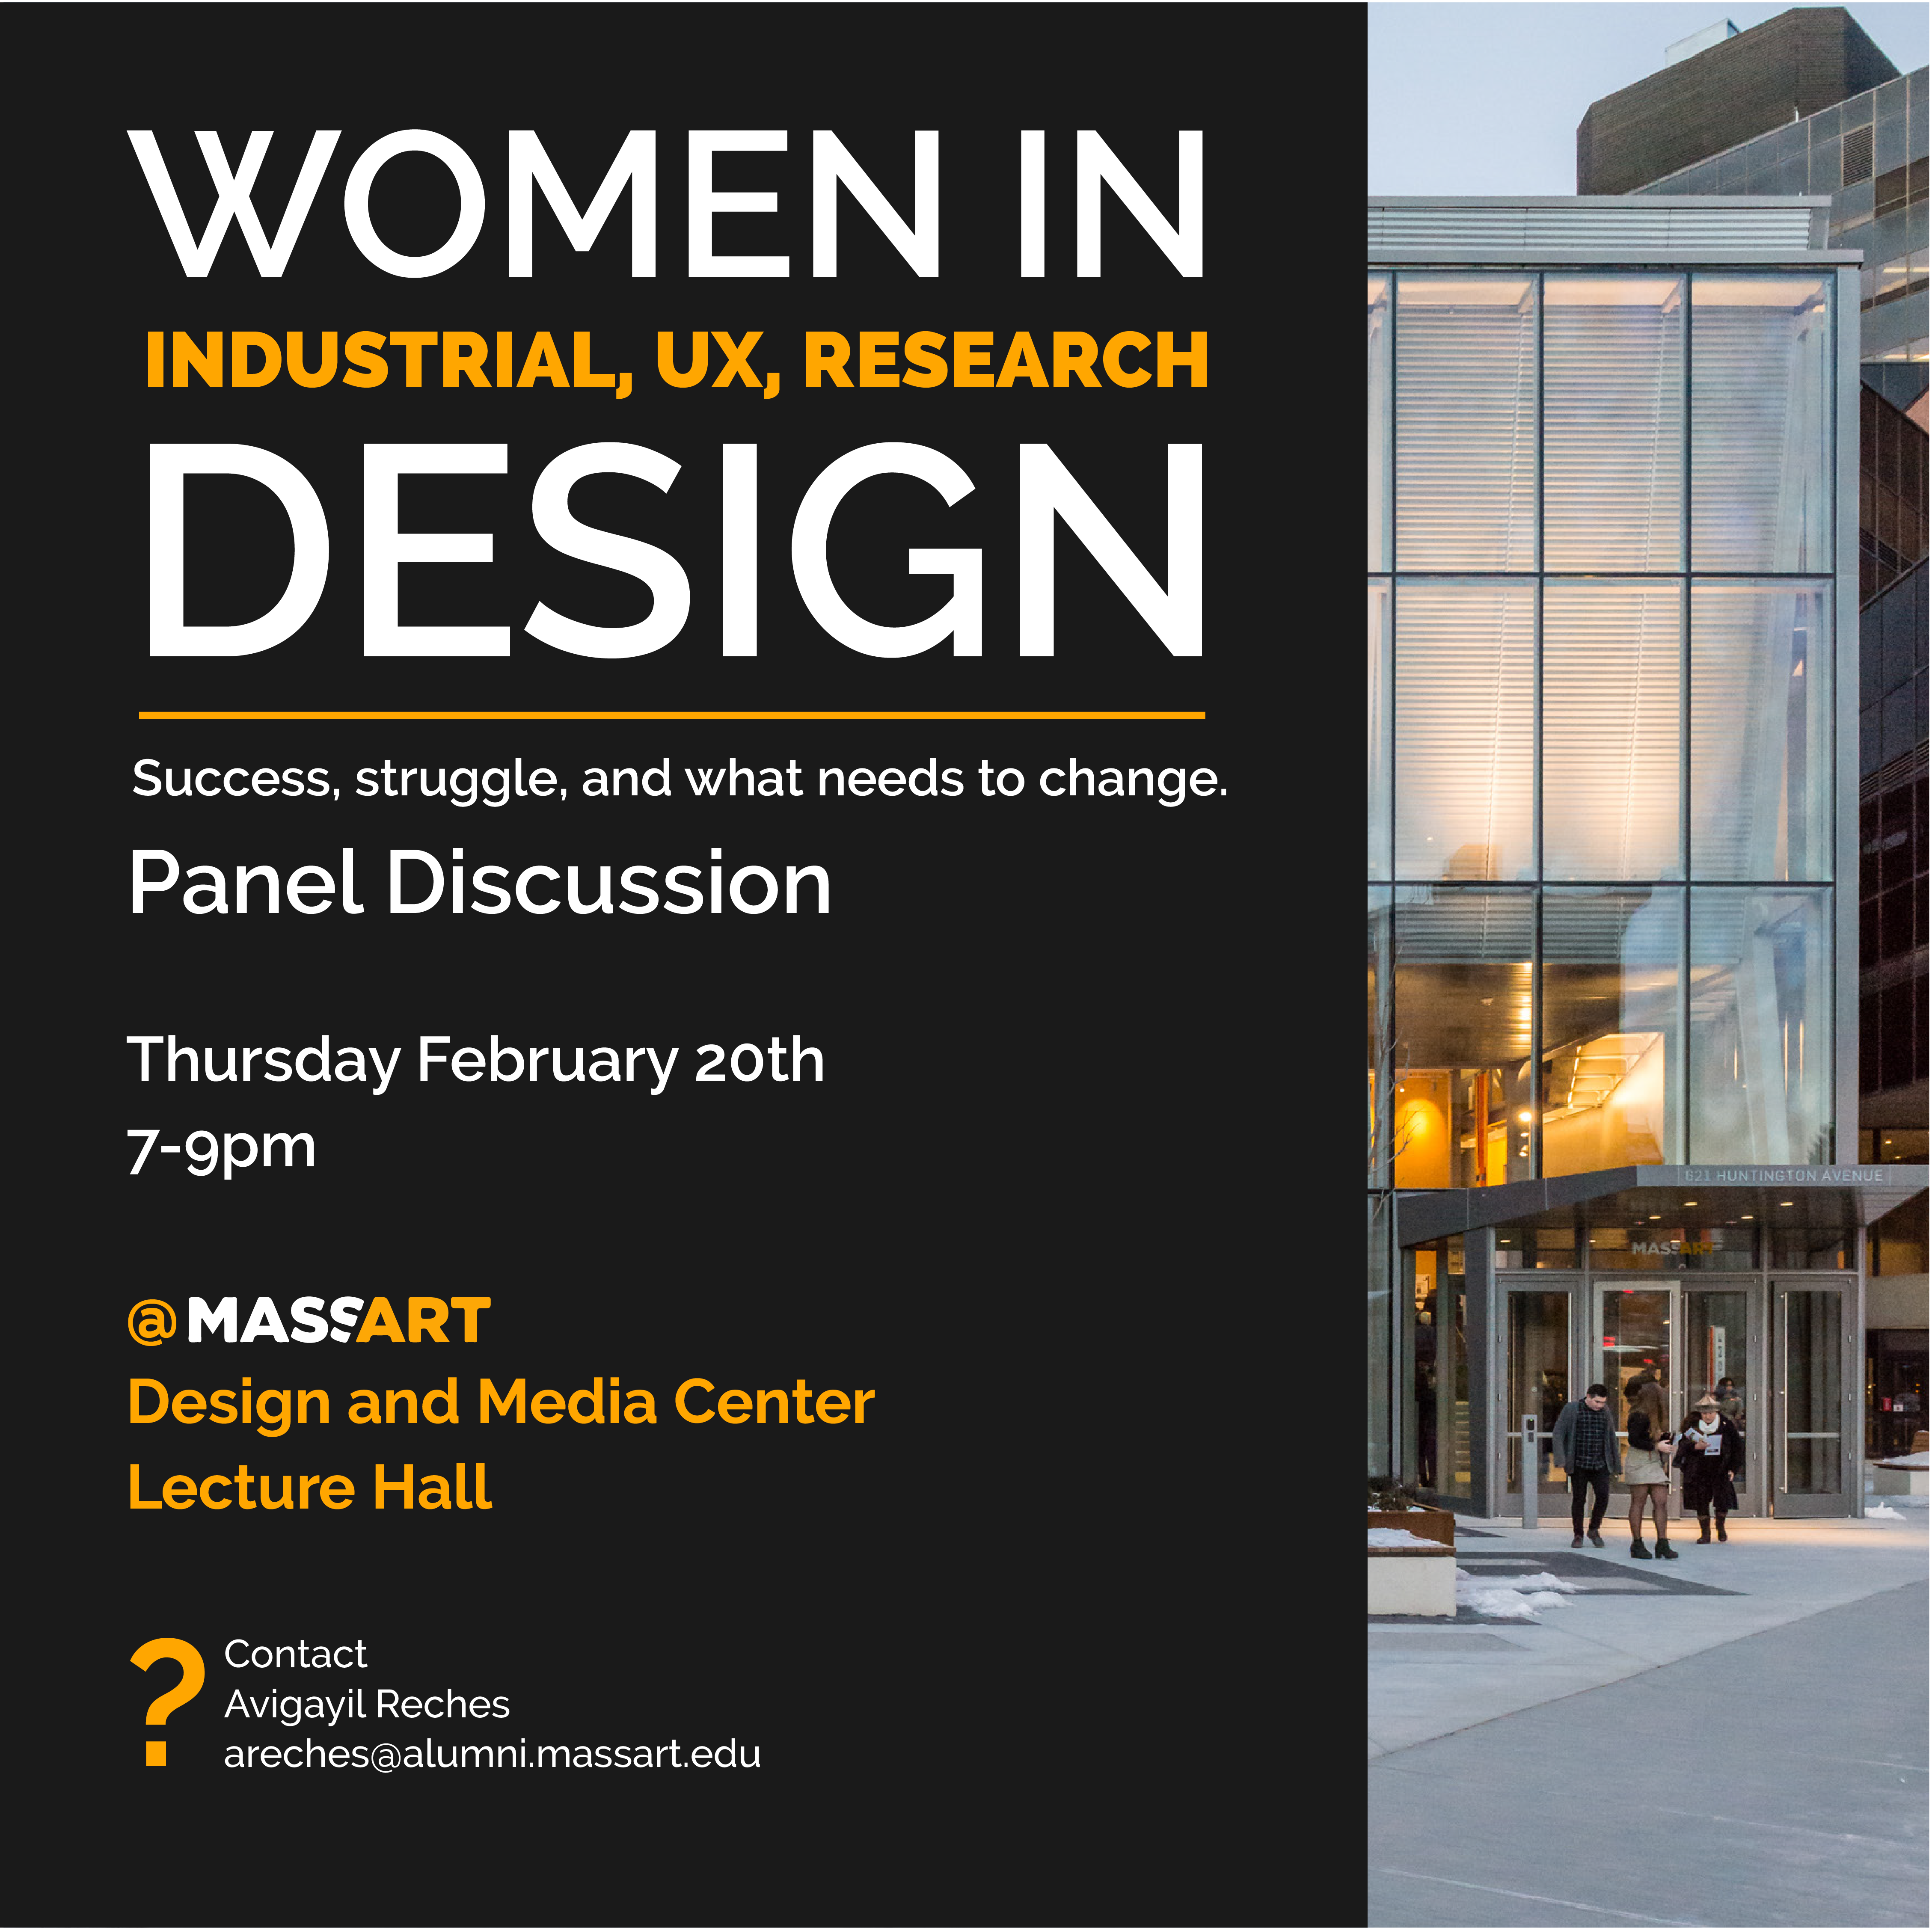 Women in Design: Panel Discussion at Mass Art